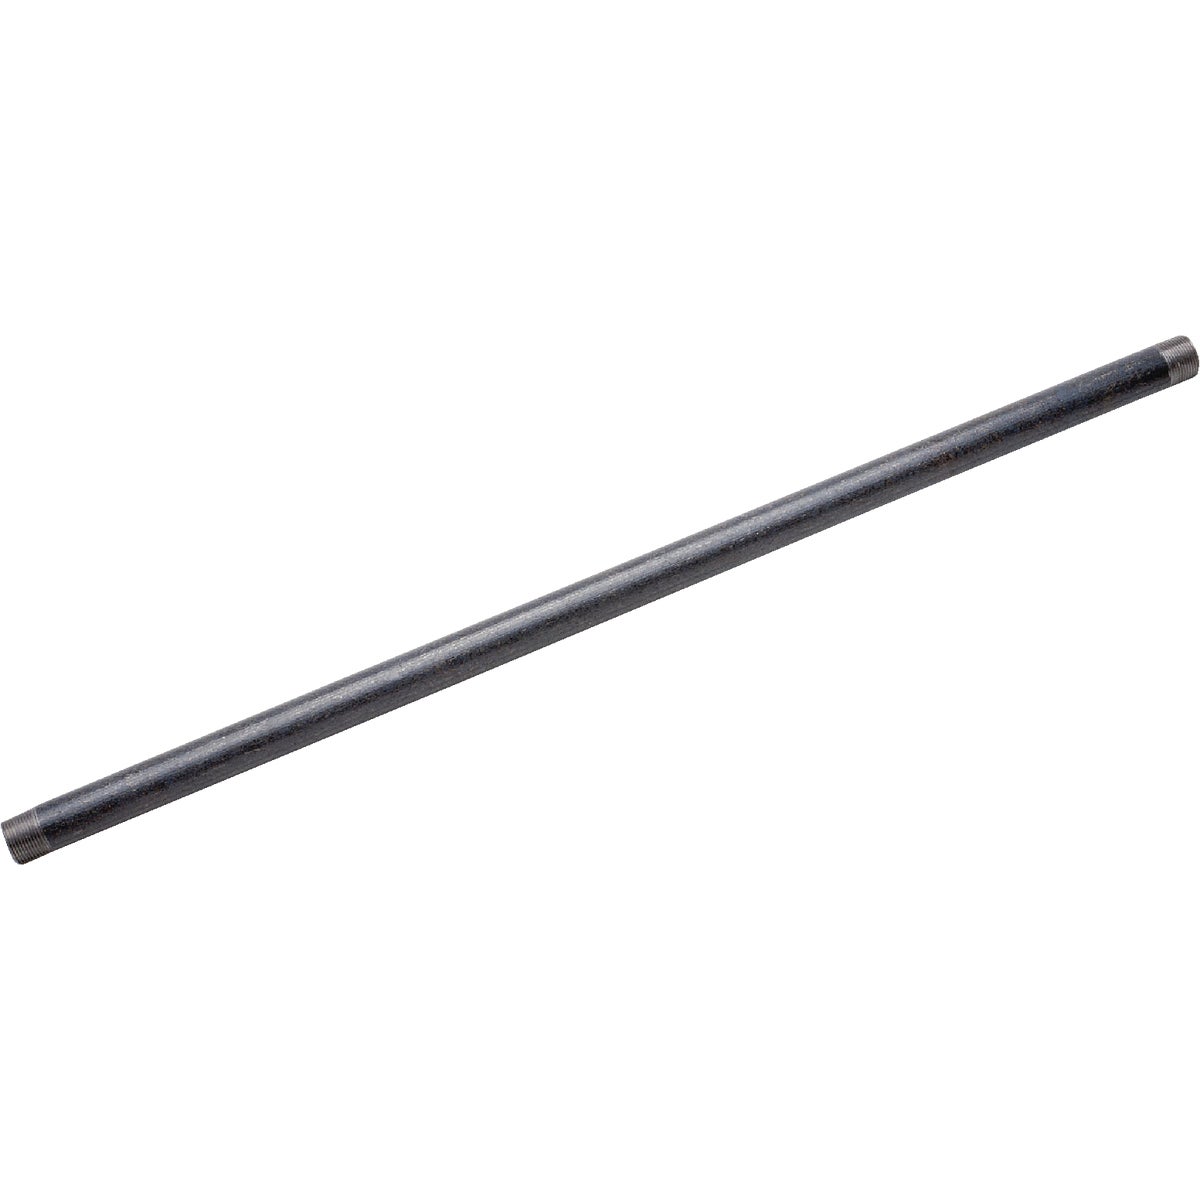 Item 400887, Domestic. Standard black pipe. Threaded both ends. Schedule 40.